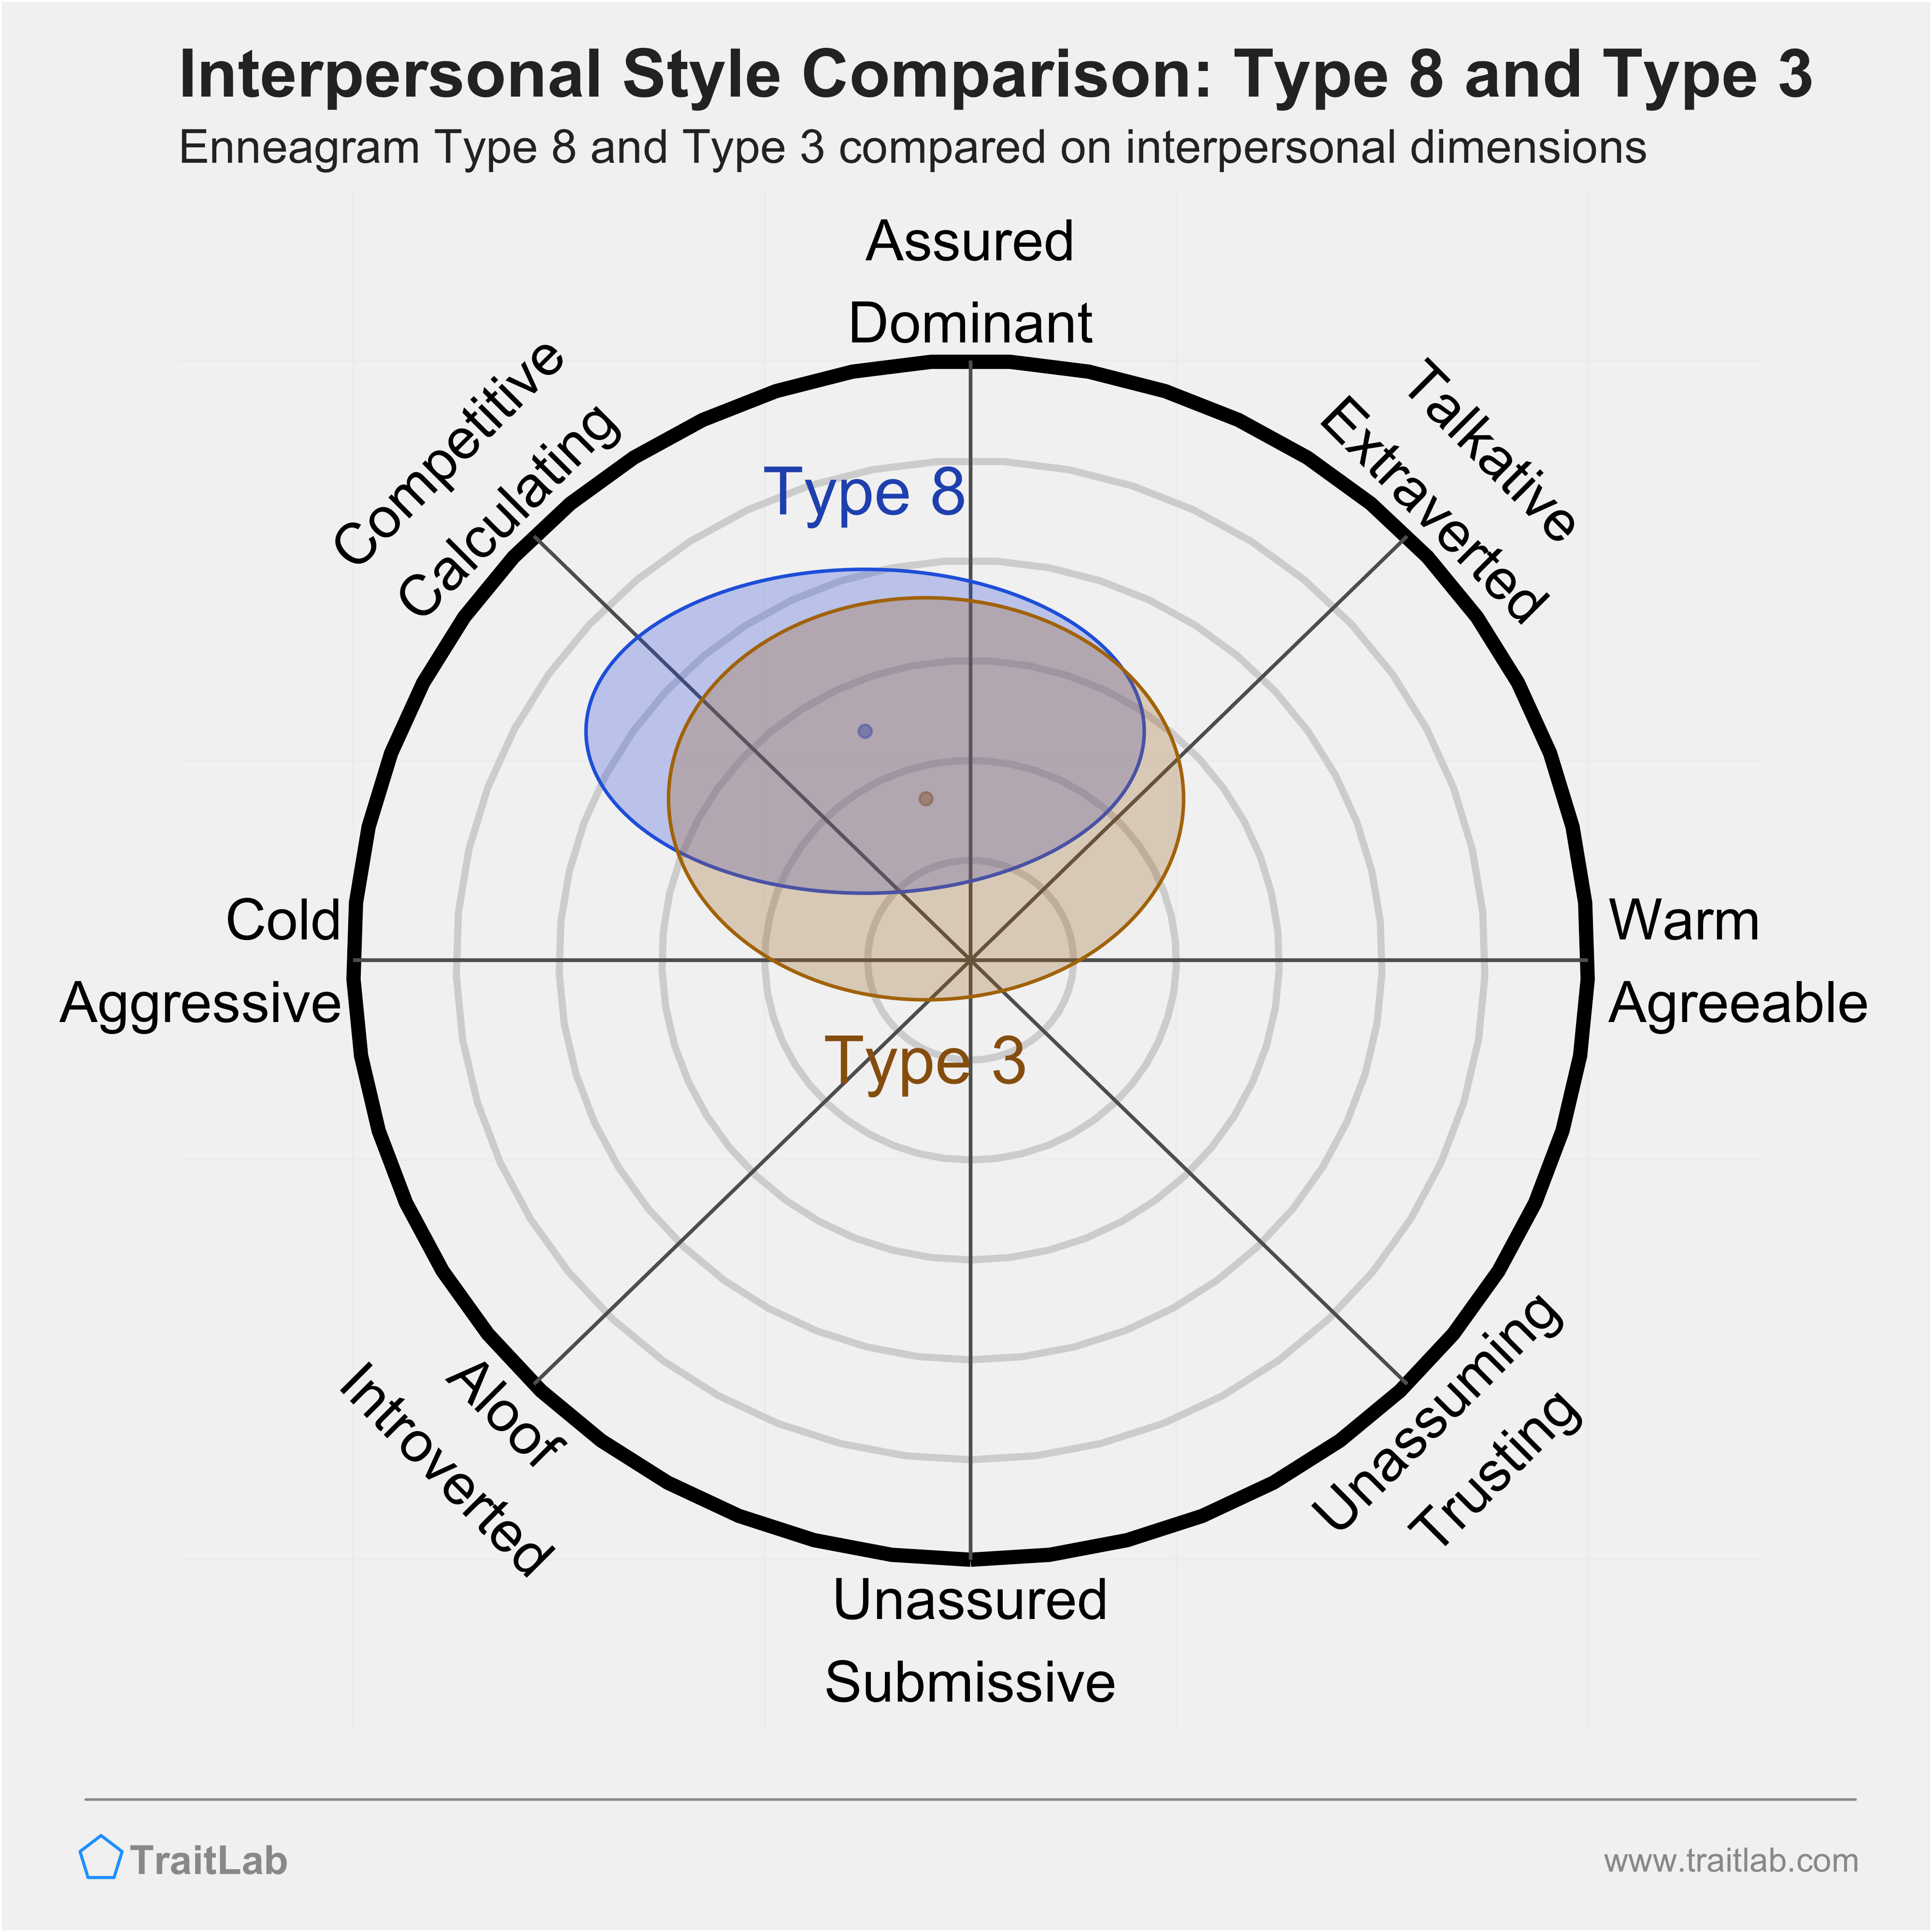 Enneagram Type 8 and Type 3 comparison across interpersonal dimensions